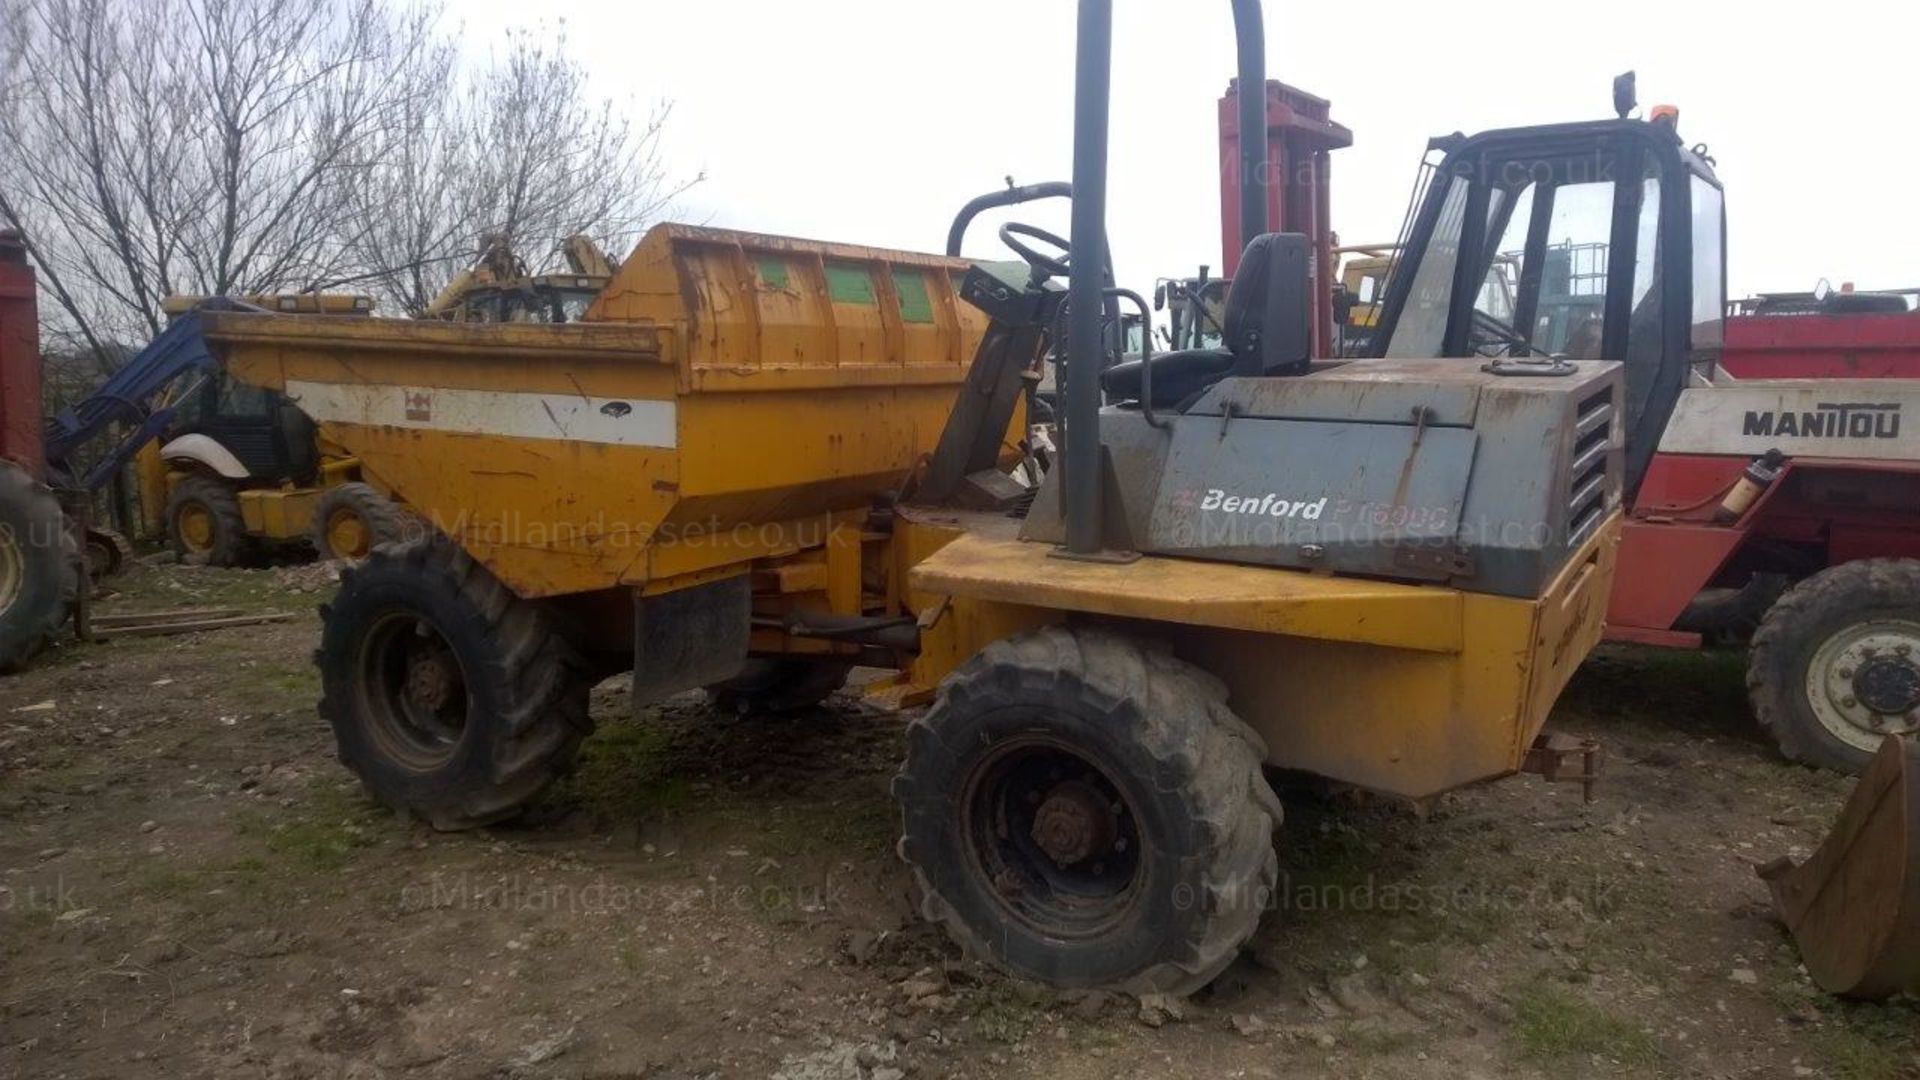 DS - BENFORD PT6000 6 TONNE DUMPER   4x4   COLLECTION FROM CHESTERFIELD - Image 2 of 6